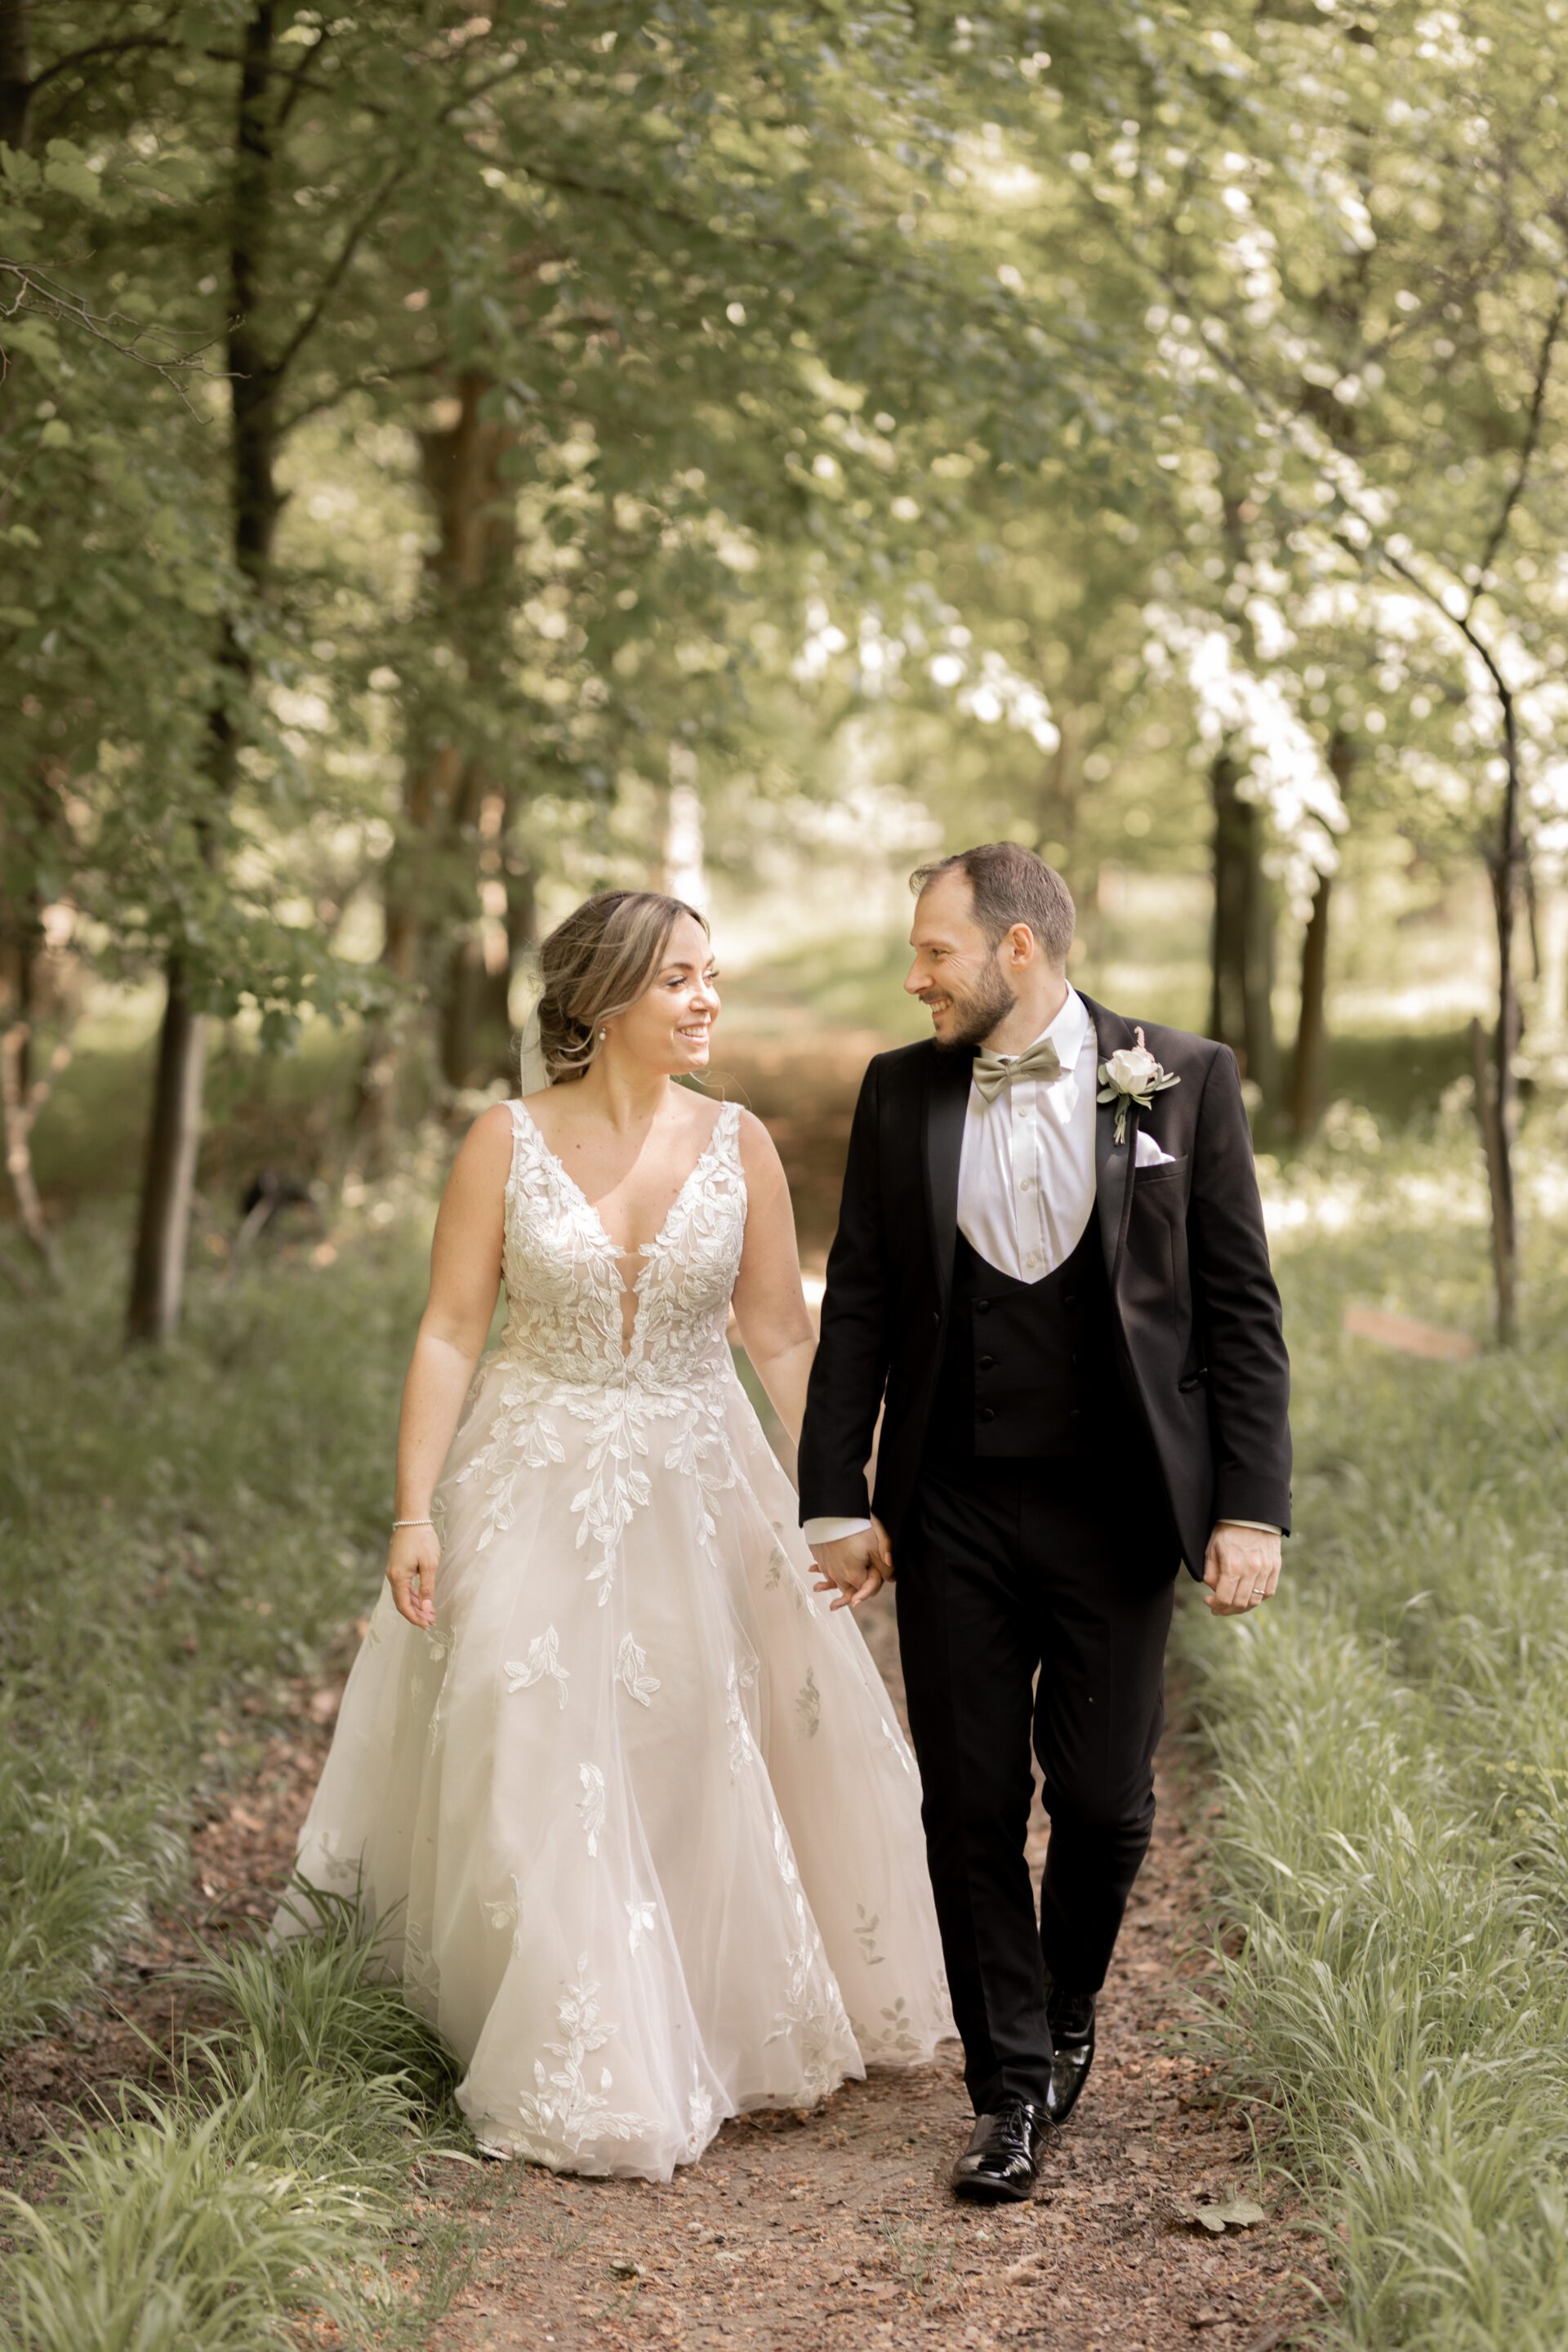 The bride and groom walk hand in hand through the woods at Old Luxters Barn in Oxfordshire